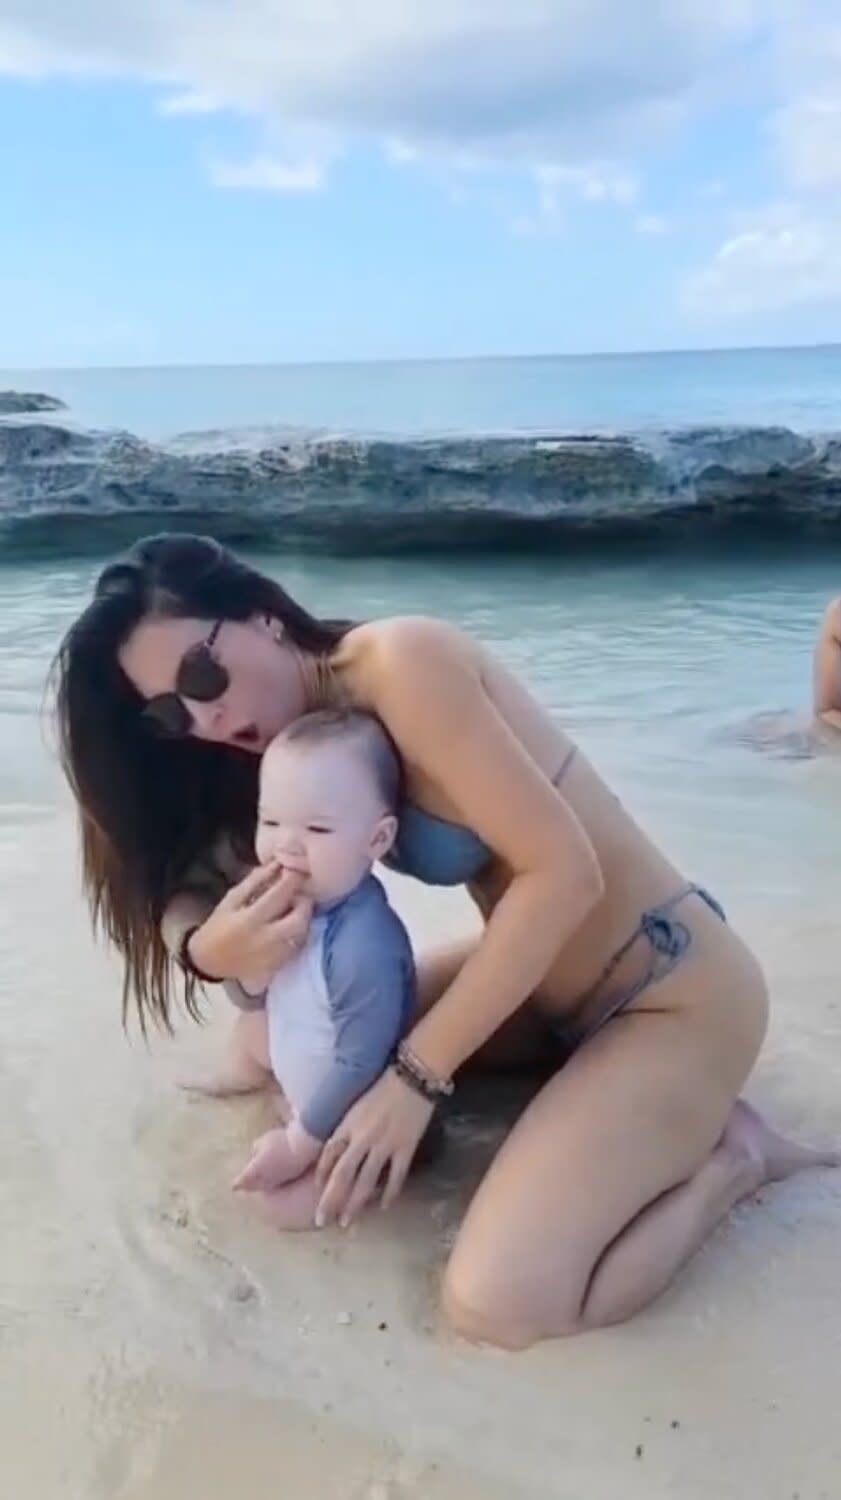 Olivia Munn Says Son Malcolm, 1, Has ‘Entered the “Puts Everything in Their Mouth” Era’ During Beach Outing